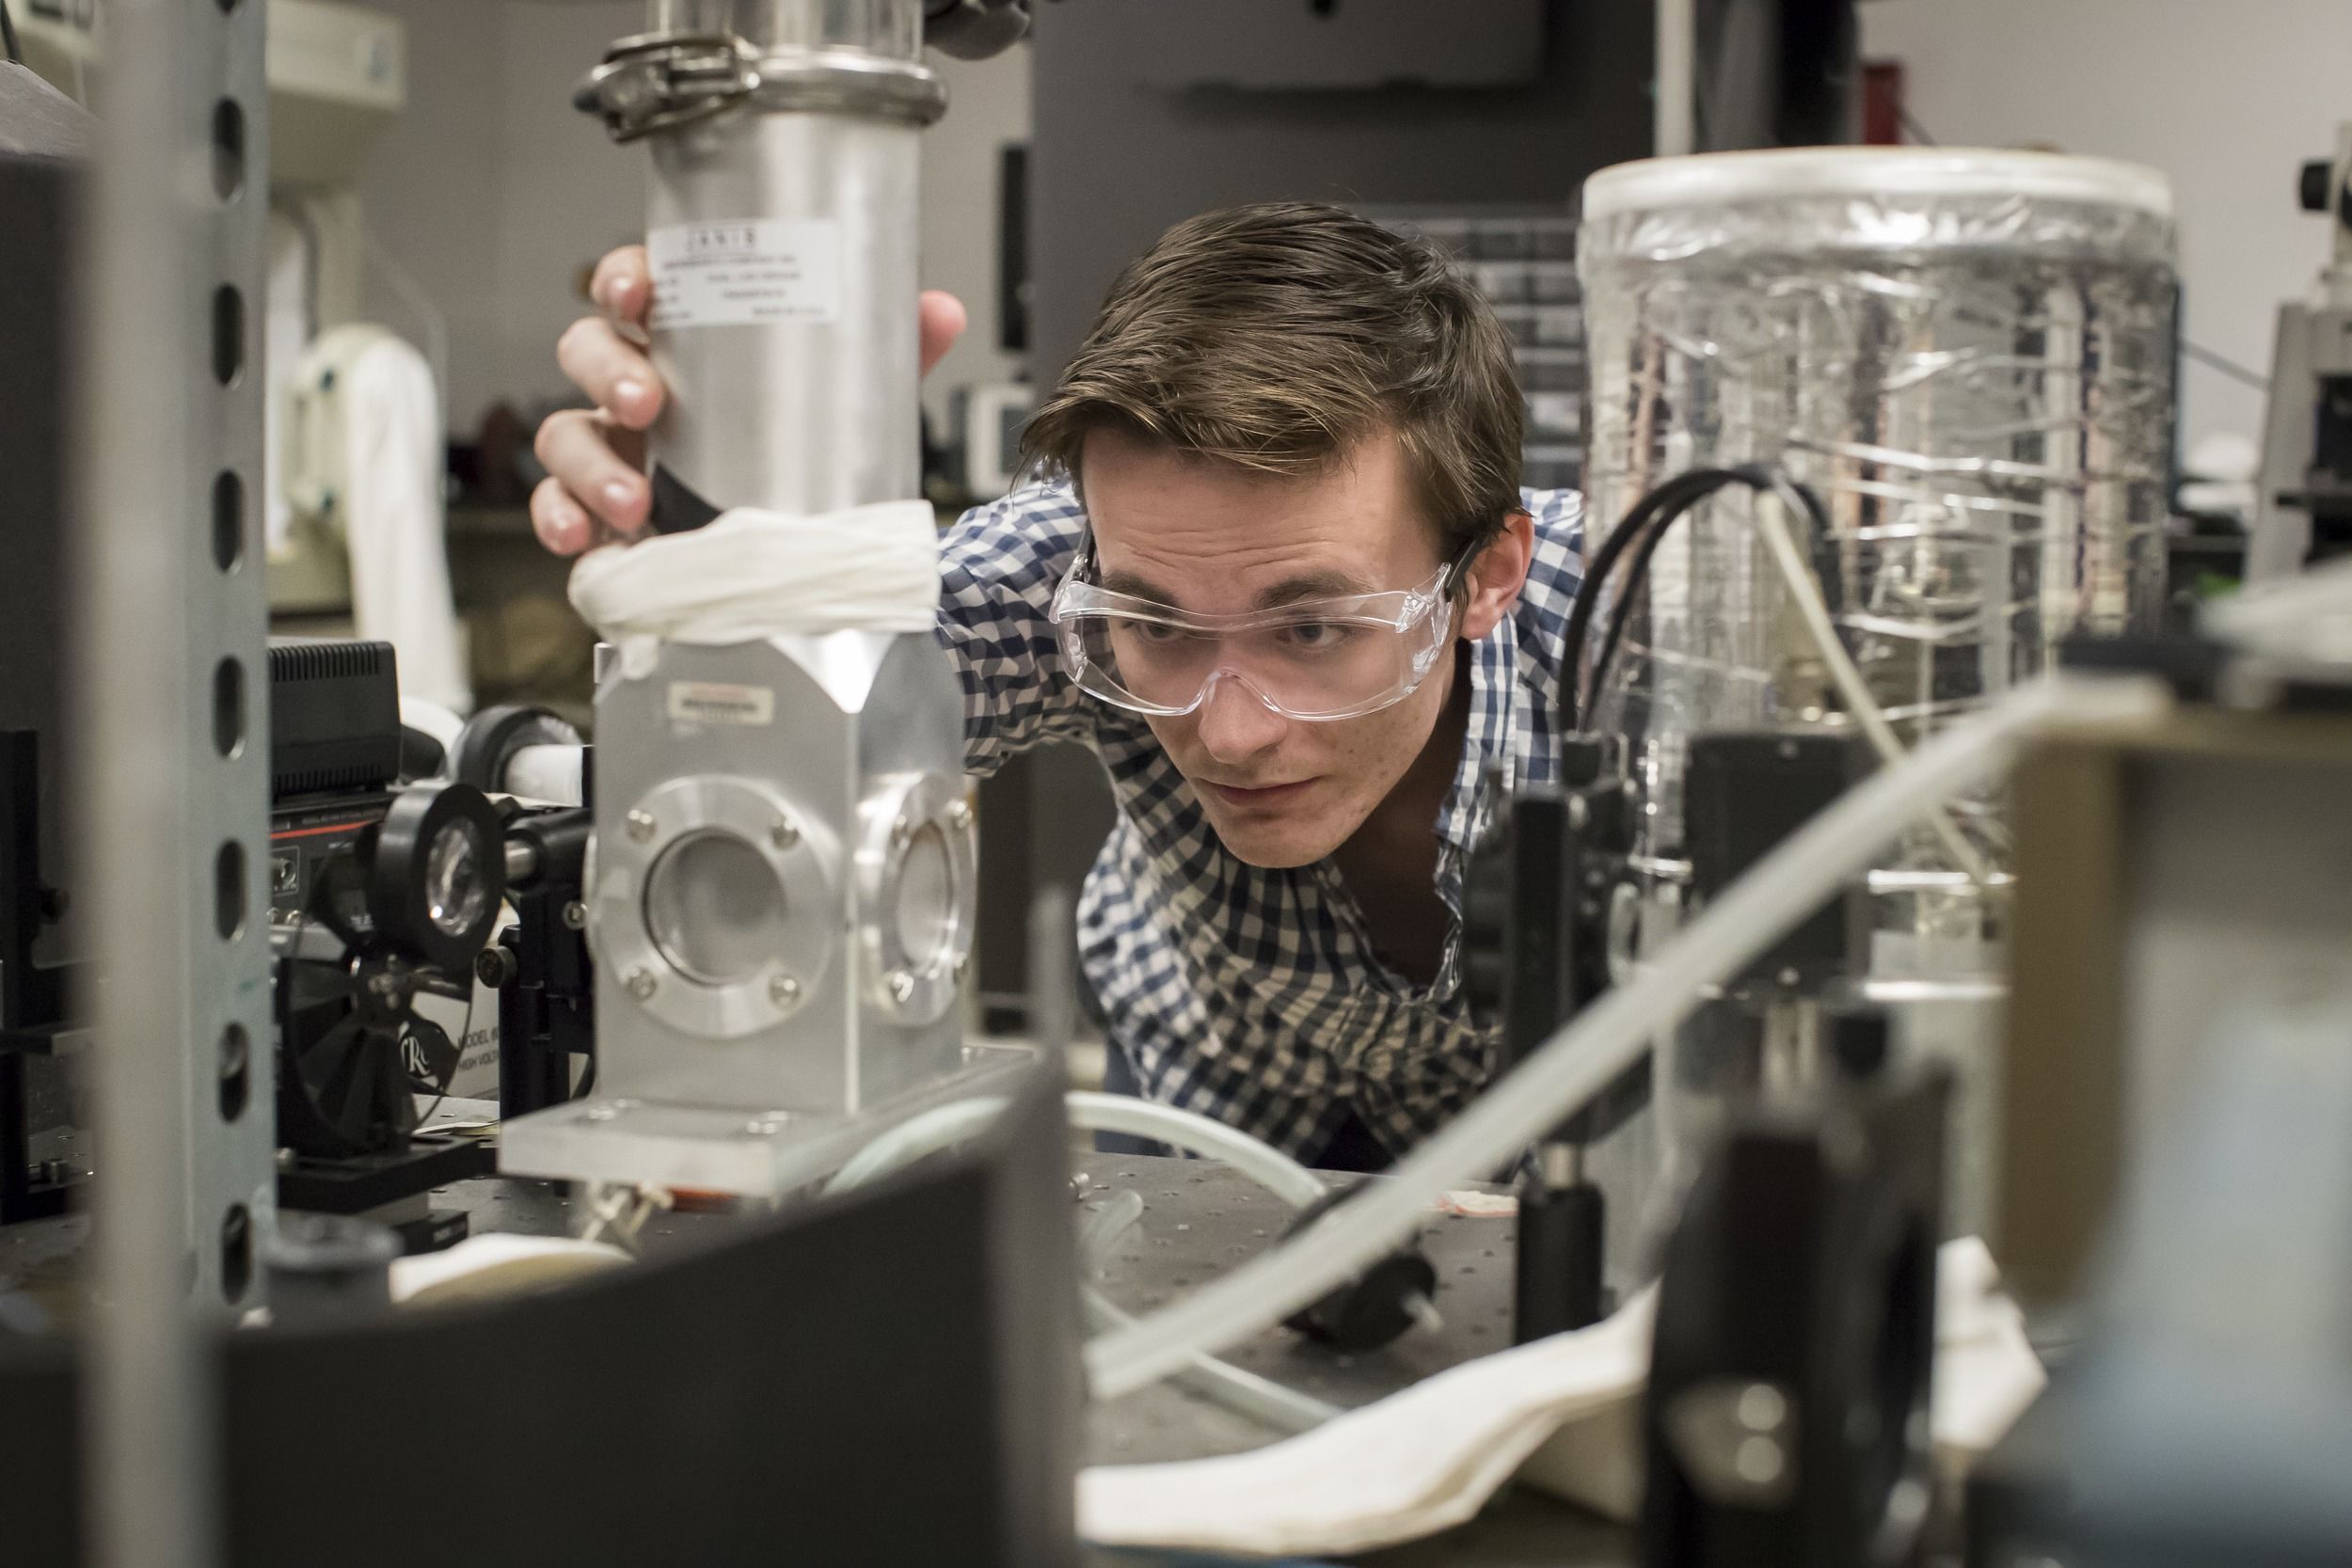 A student examines machinery in the biophysical lab 